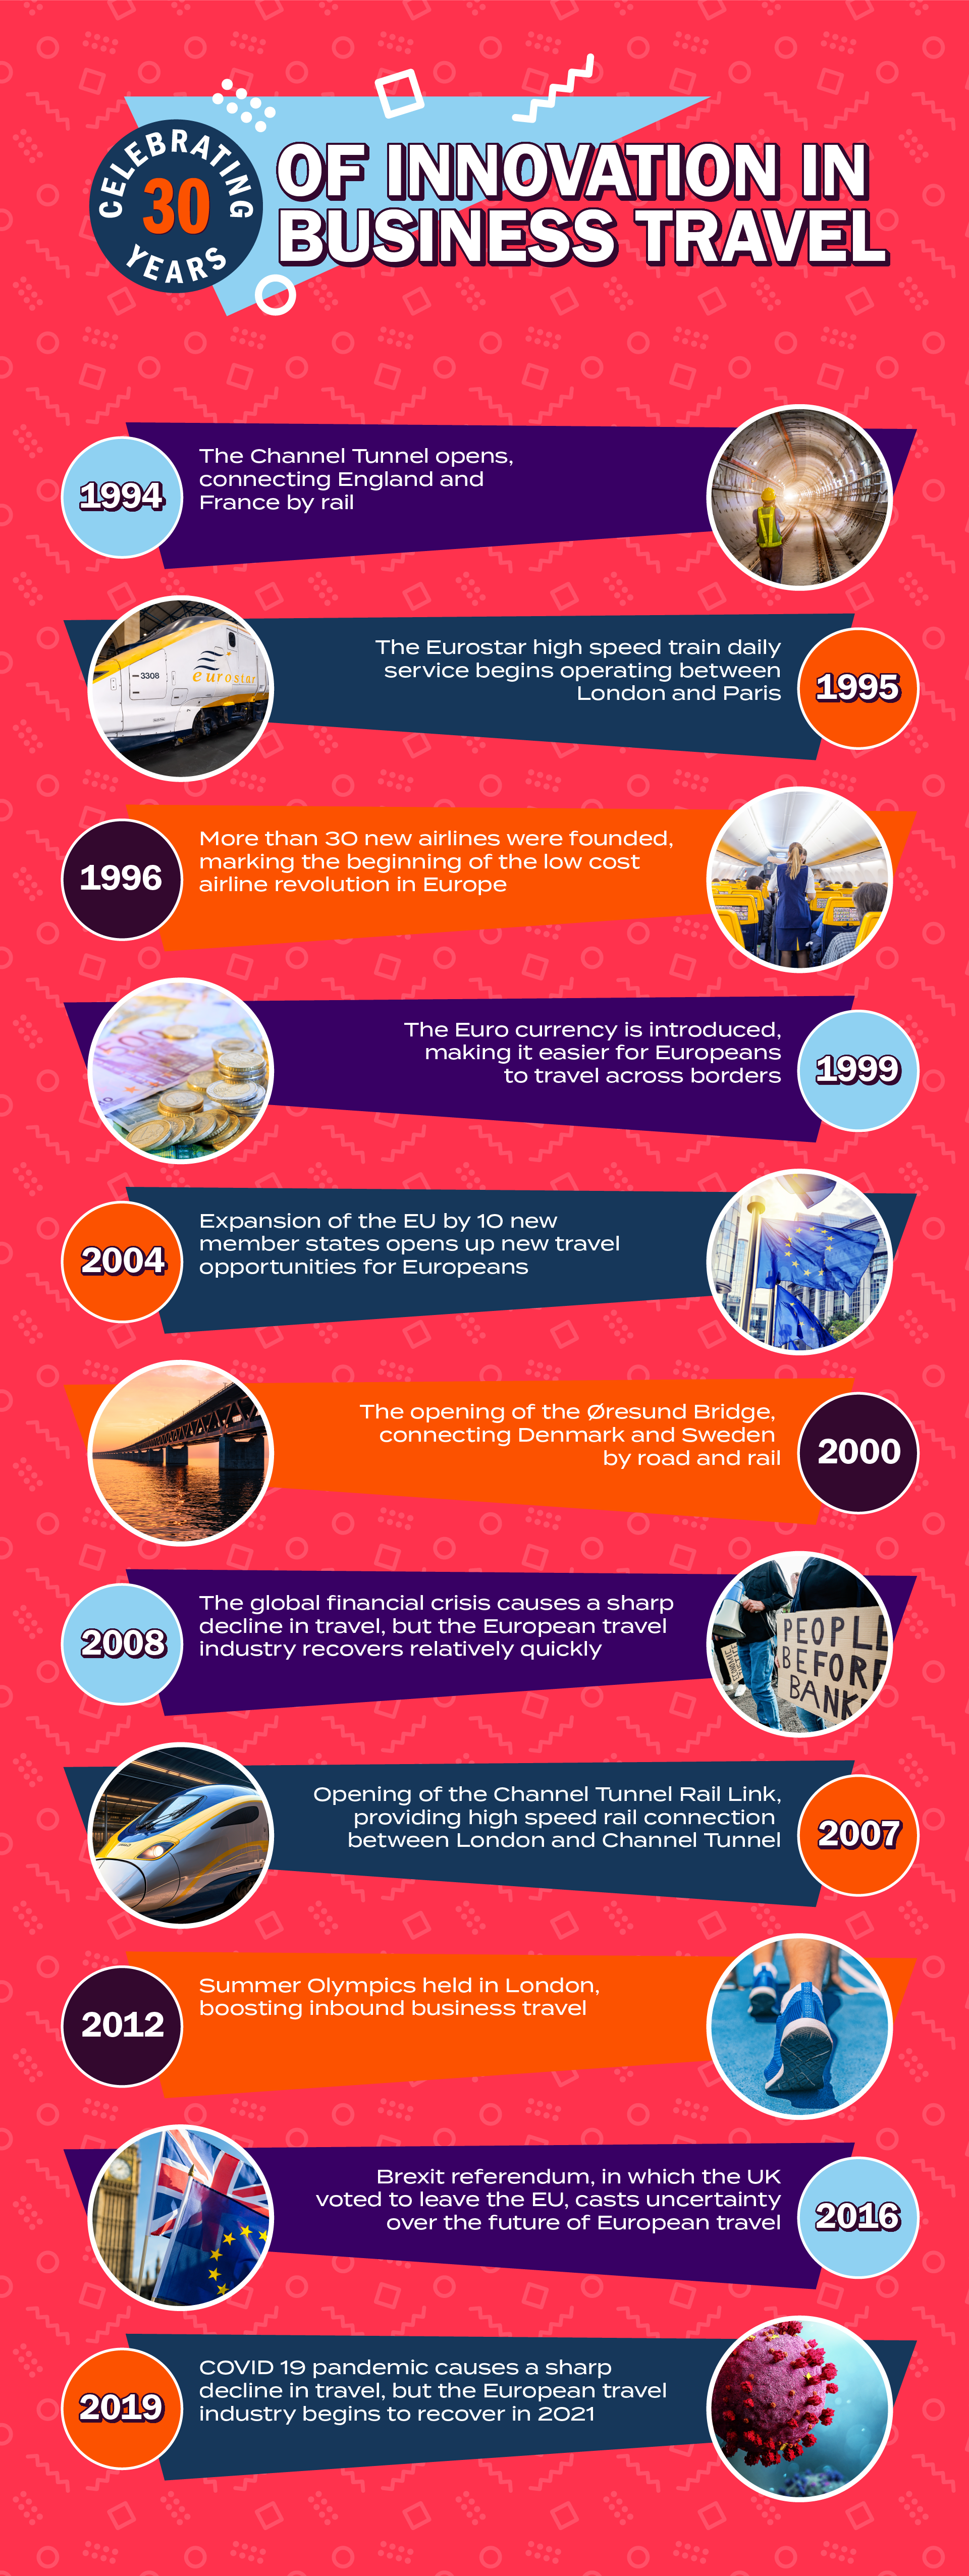 Business Travel Show Europe 1994 campaign infographic